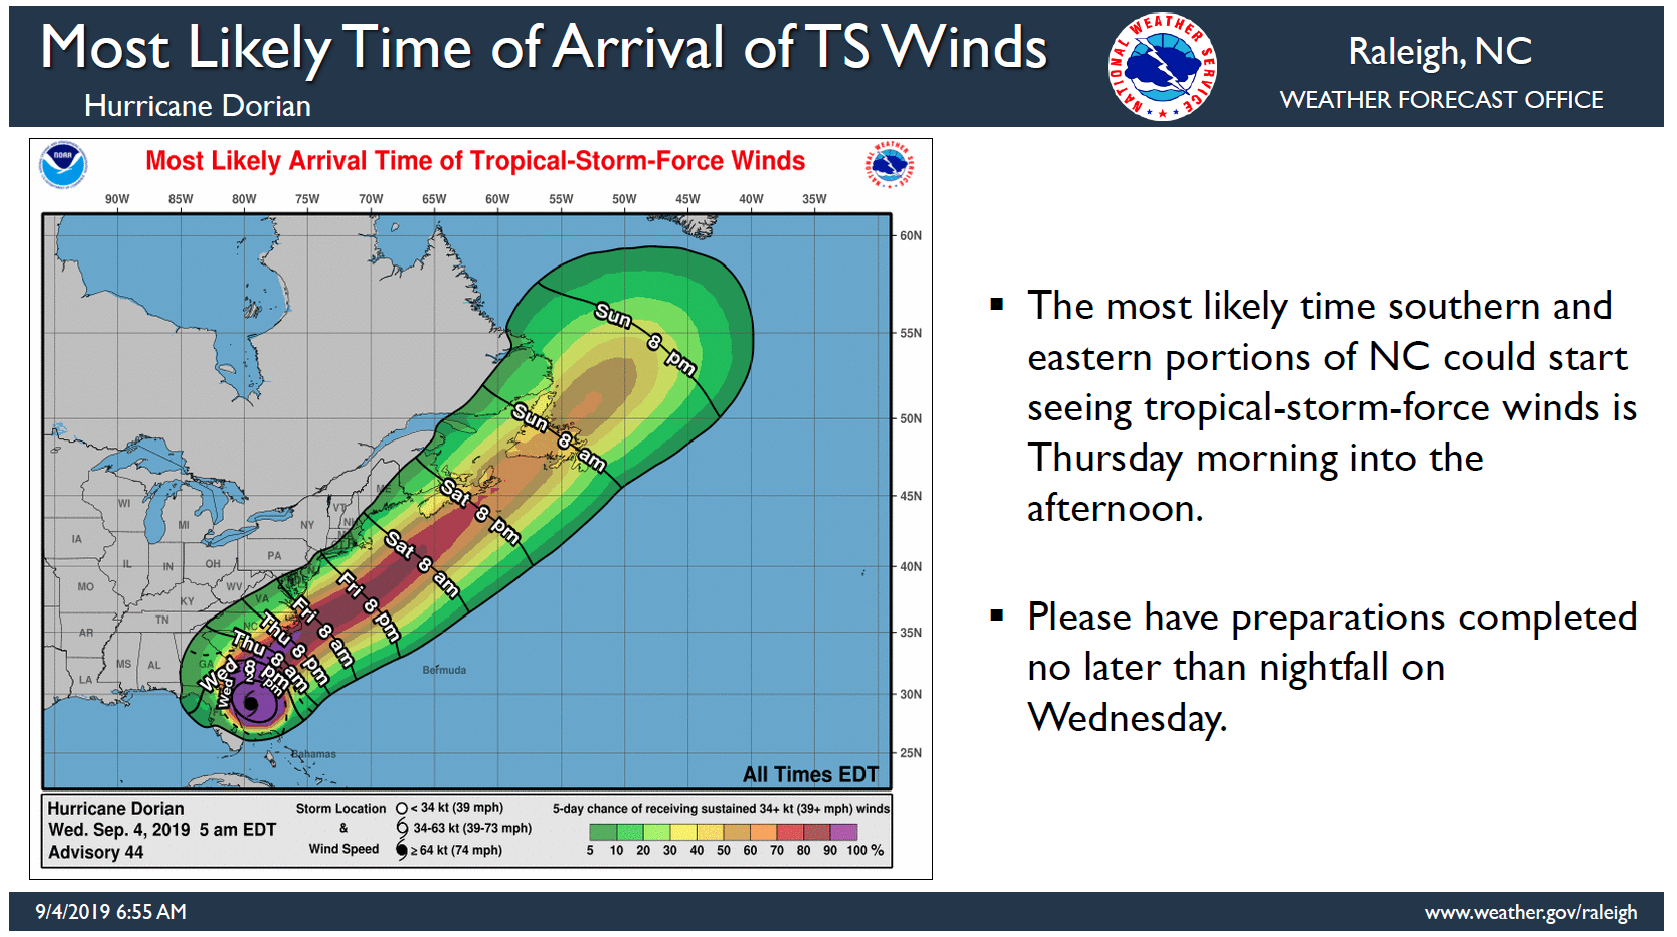 National weather service Raleigh. Most likely arrival time of tropical storm force winds. Thursday for our area.